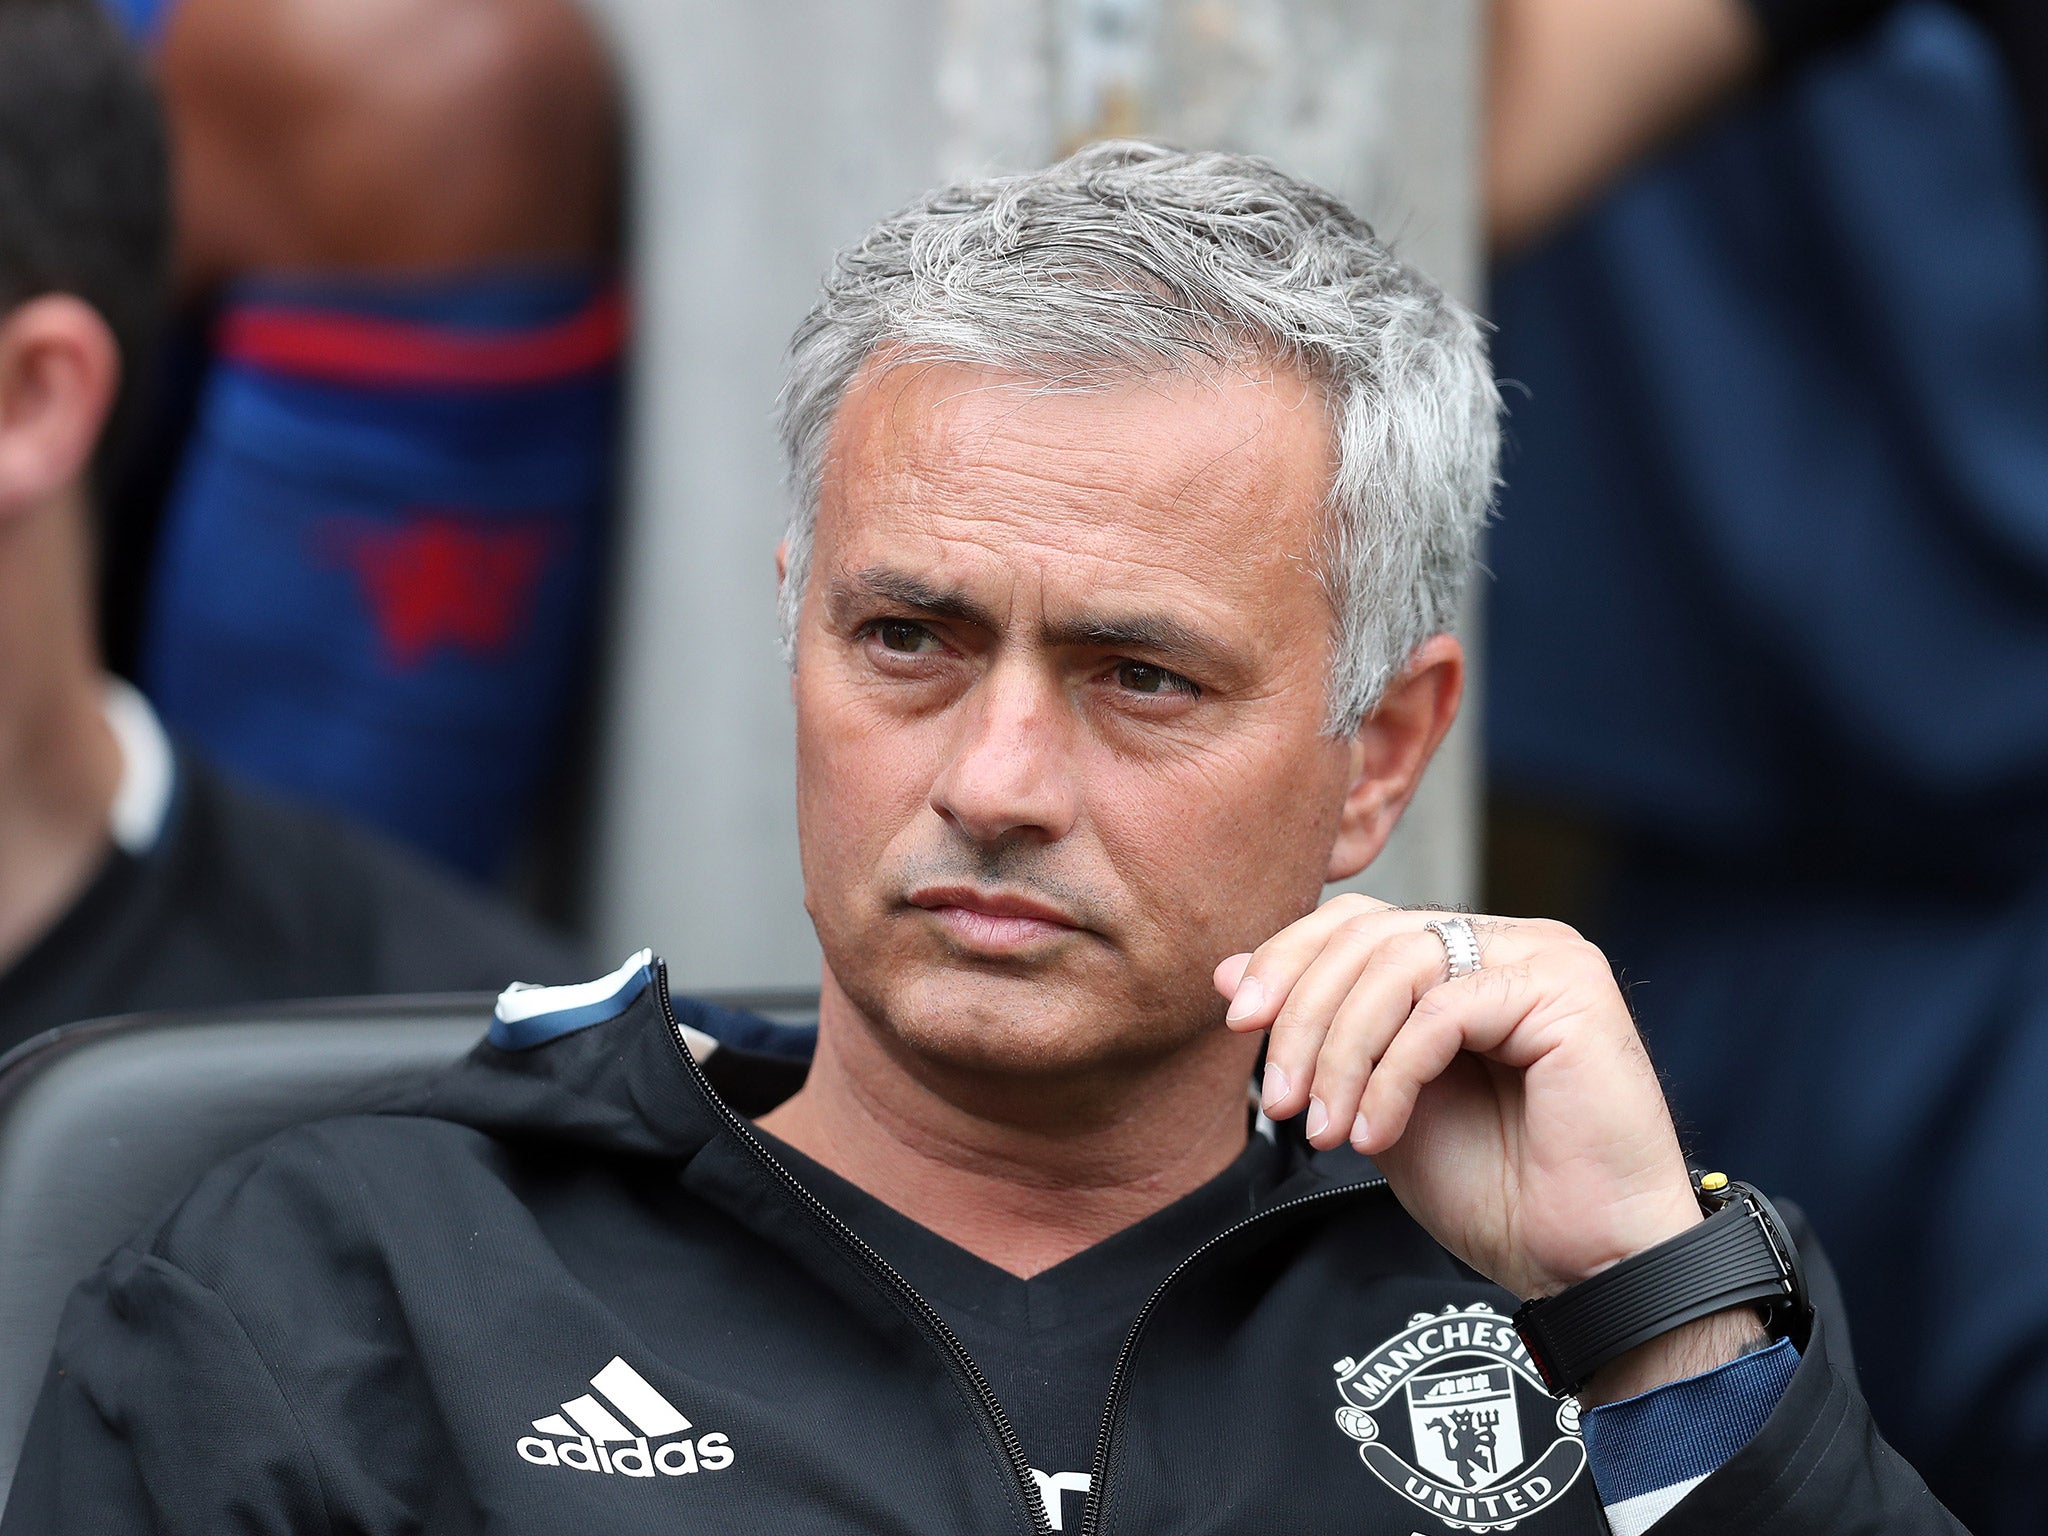 Jose Mourinho is one of three major managerial changes ahead of the 2016/17 season